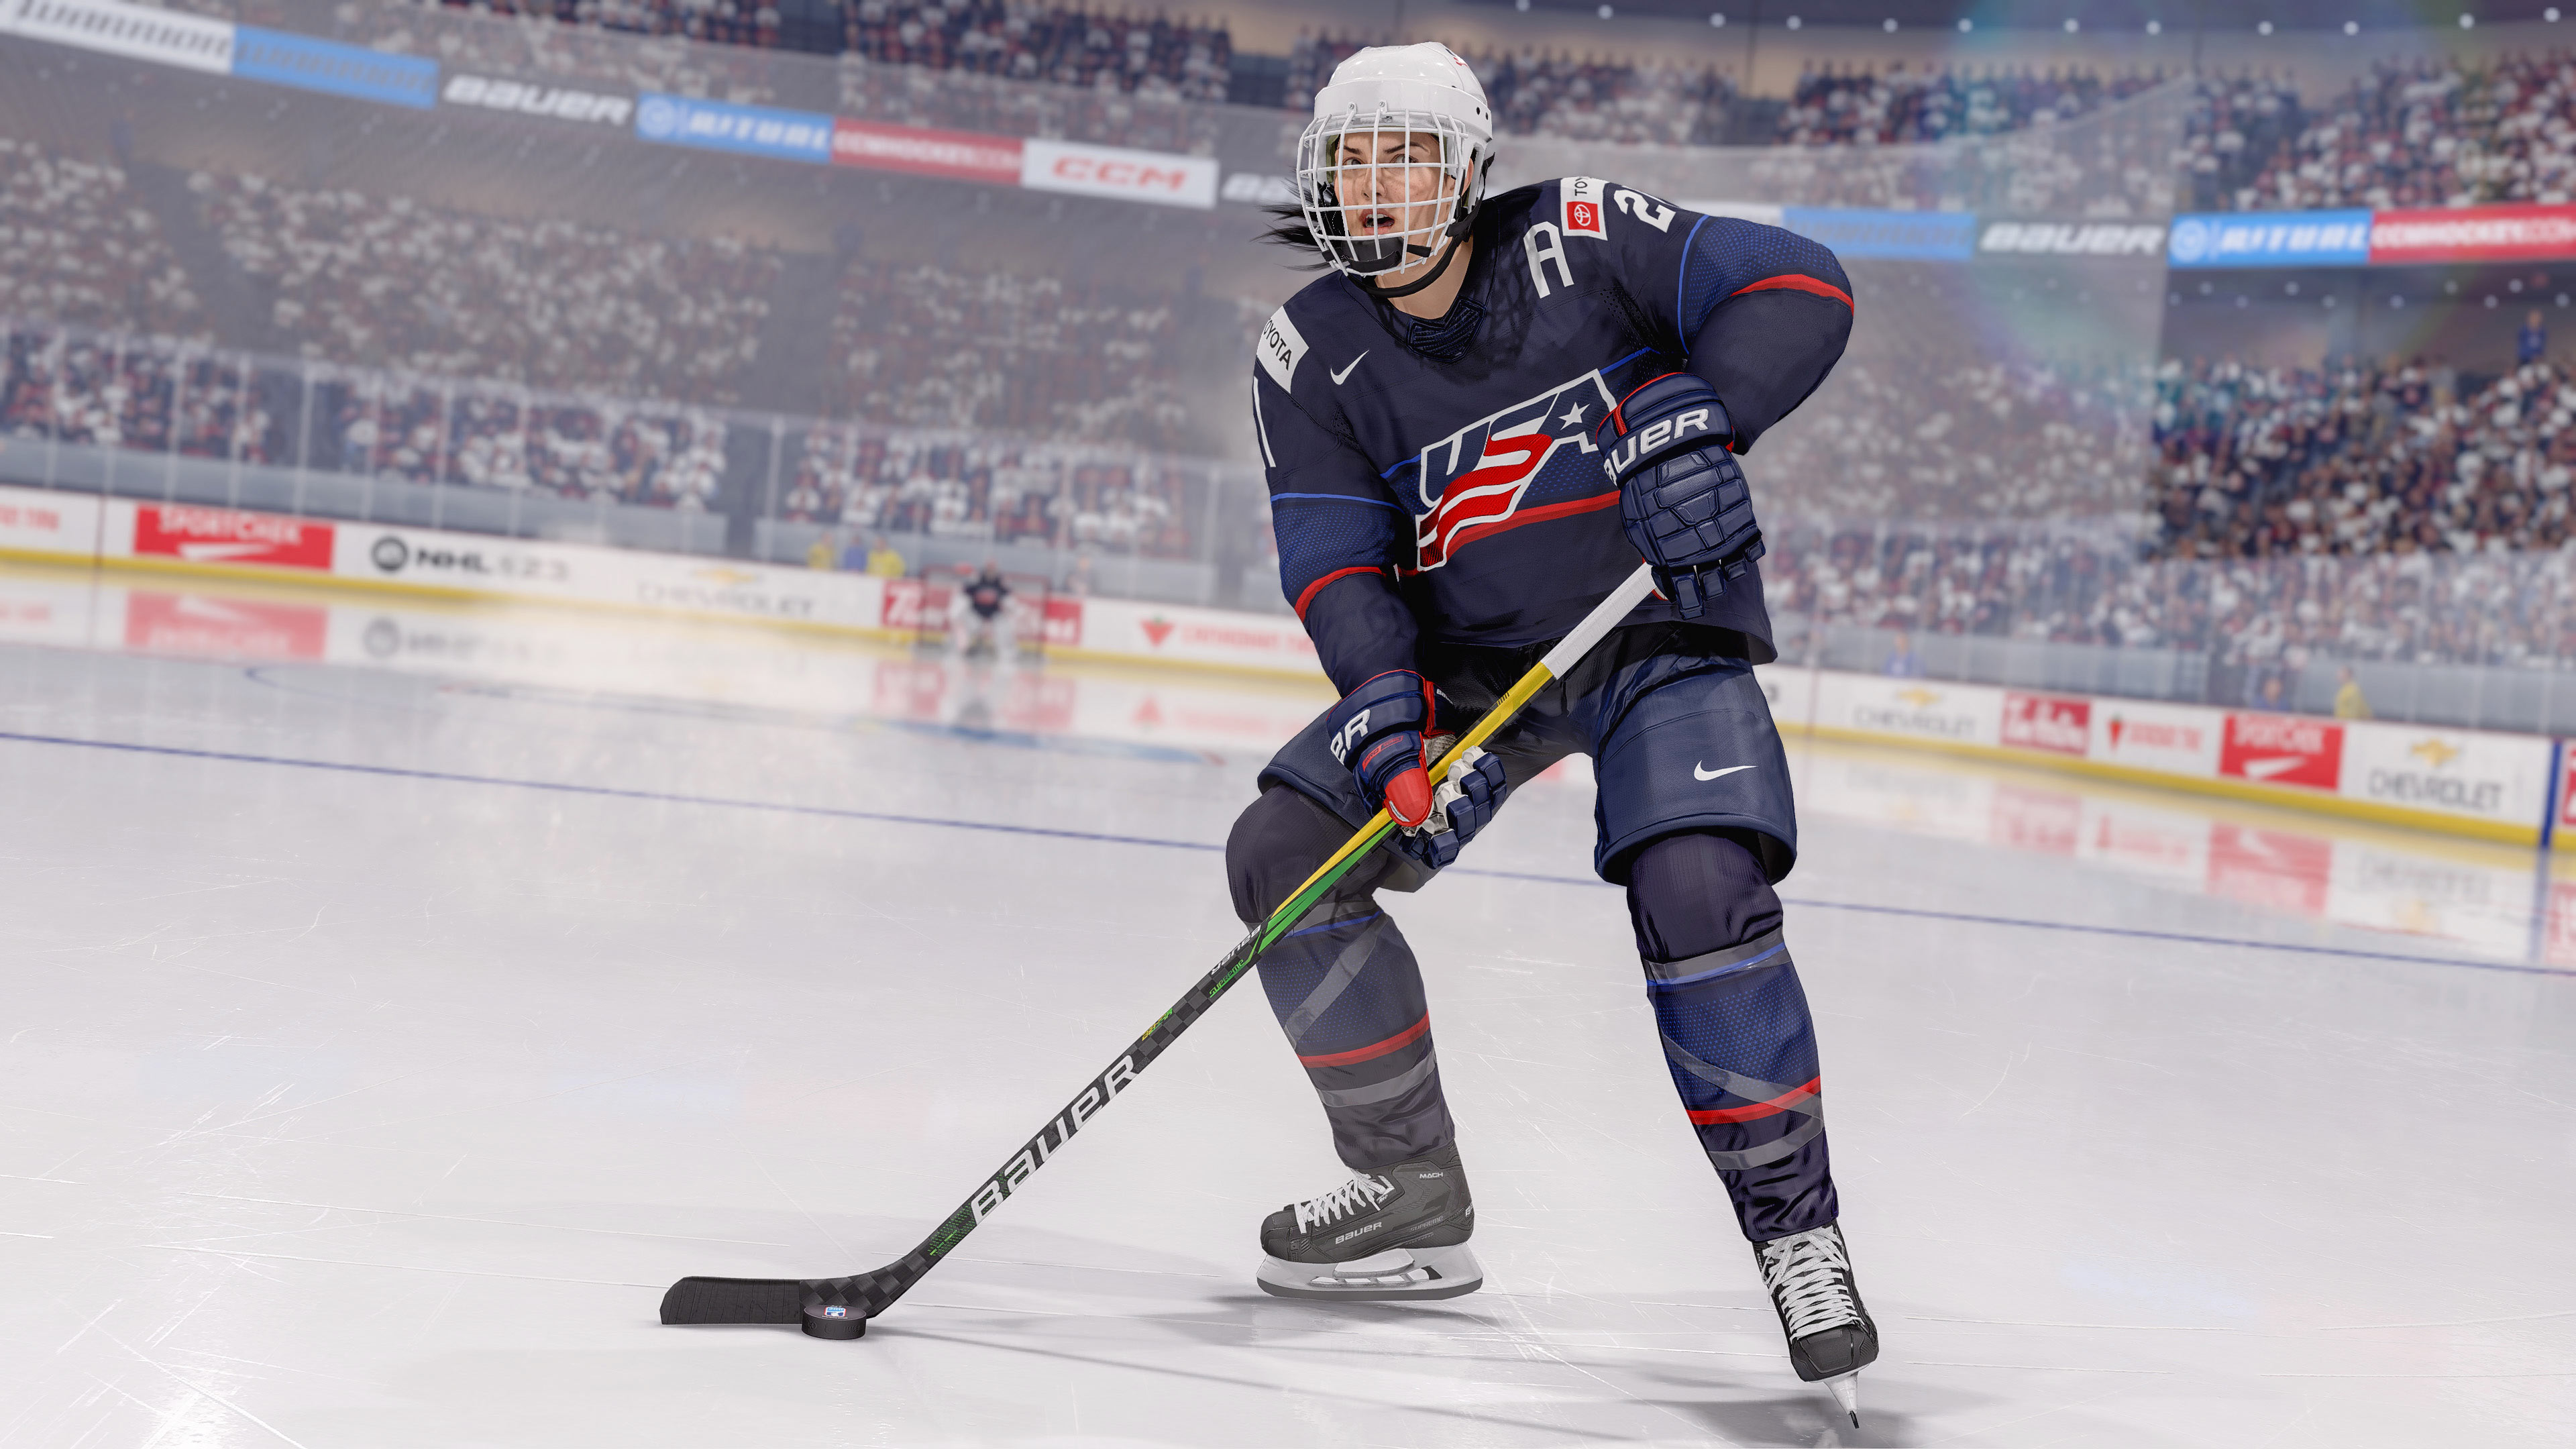 NHL 23 HD Wallpaper and Background